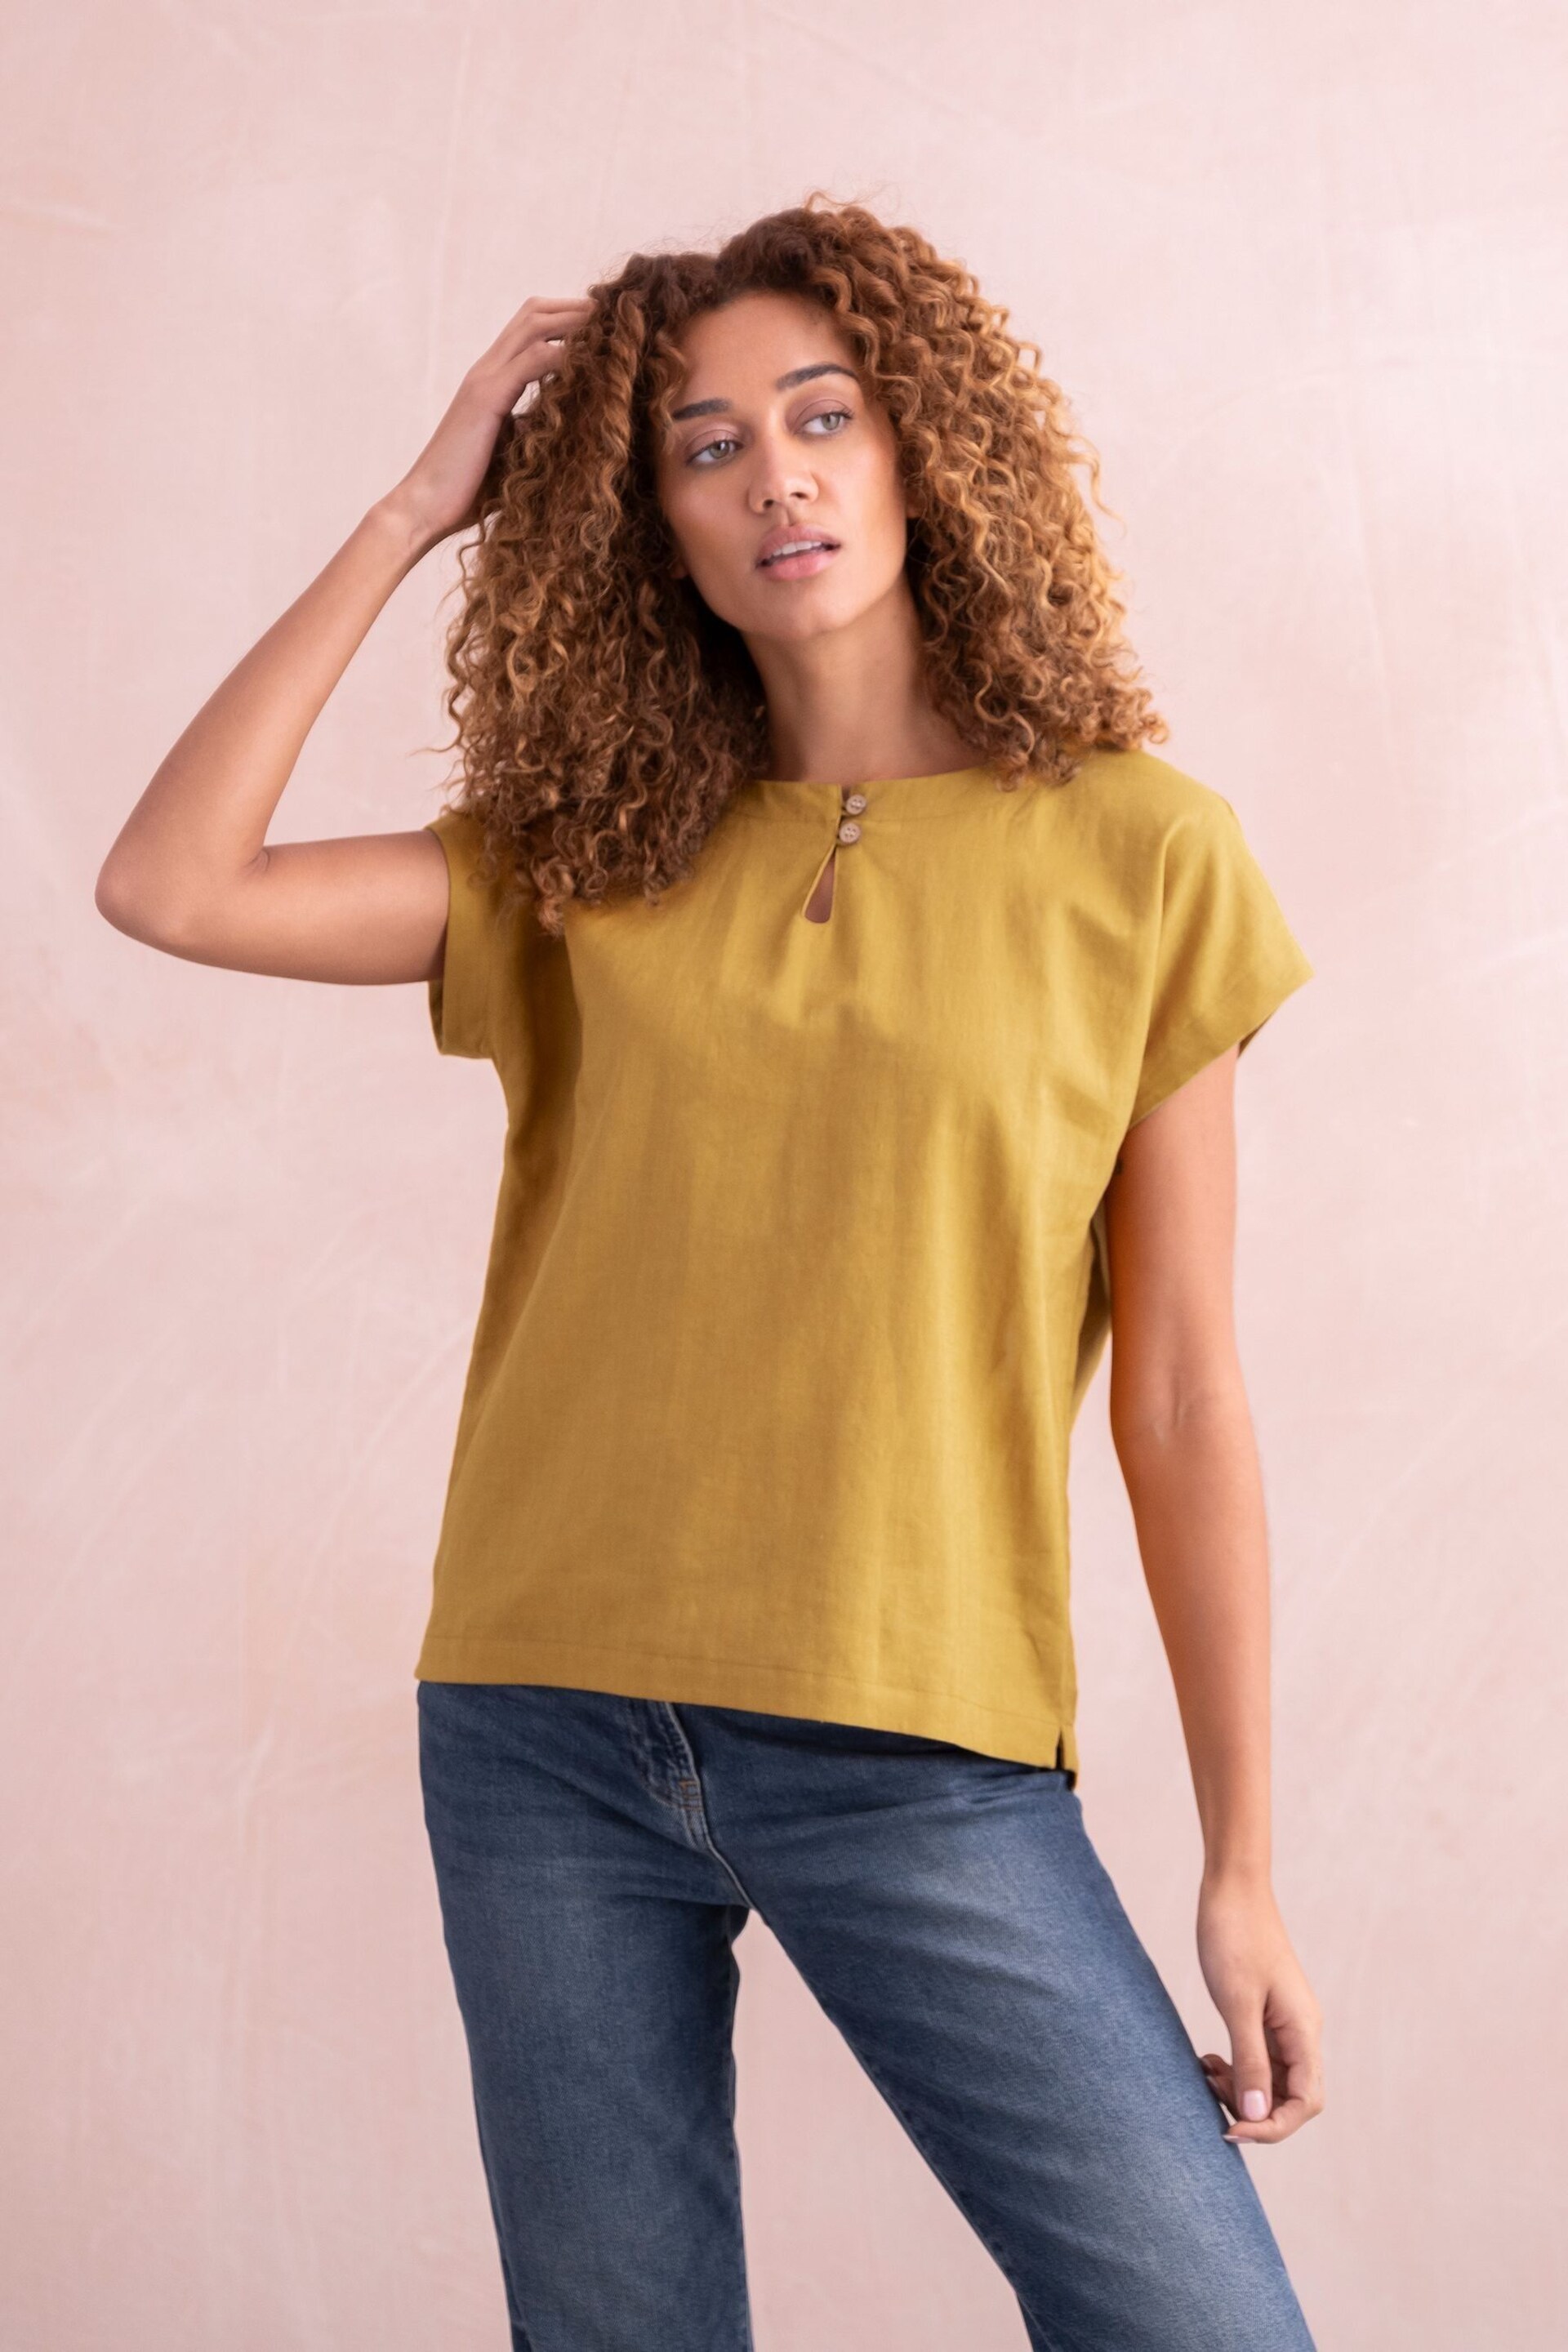 Celtic & Co. Gold Button Detail Top - Image 1 of 7